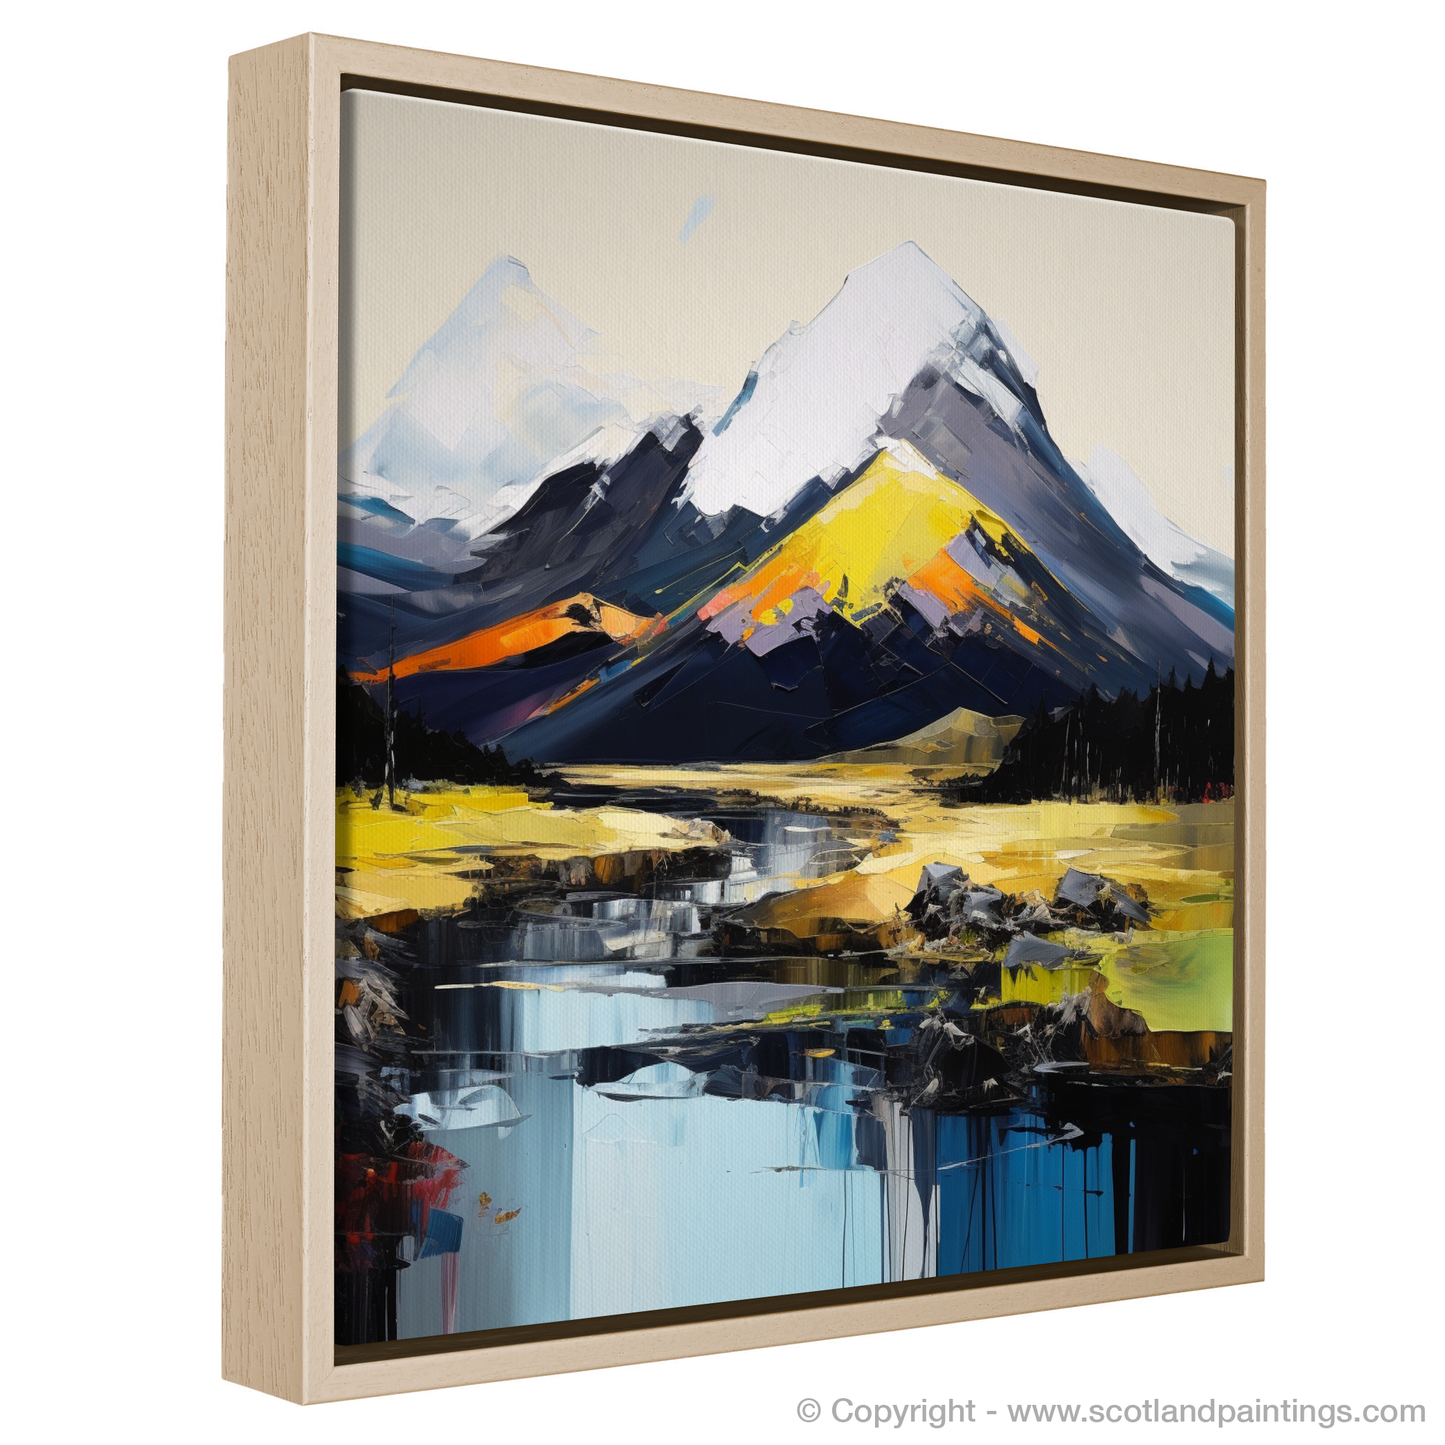 Painting and Art Print of Ben More entitled "Majestic Ben More: An Expressionist Ode to the Scottish Munros".